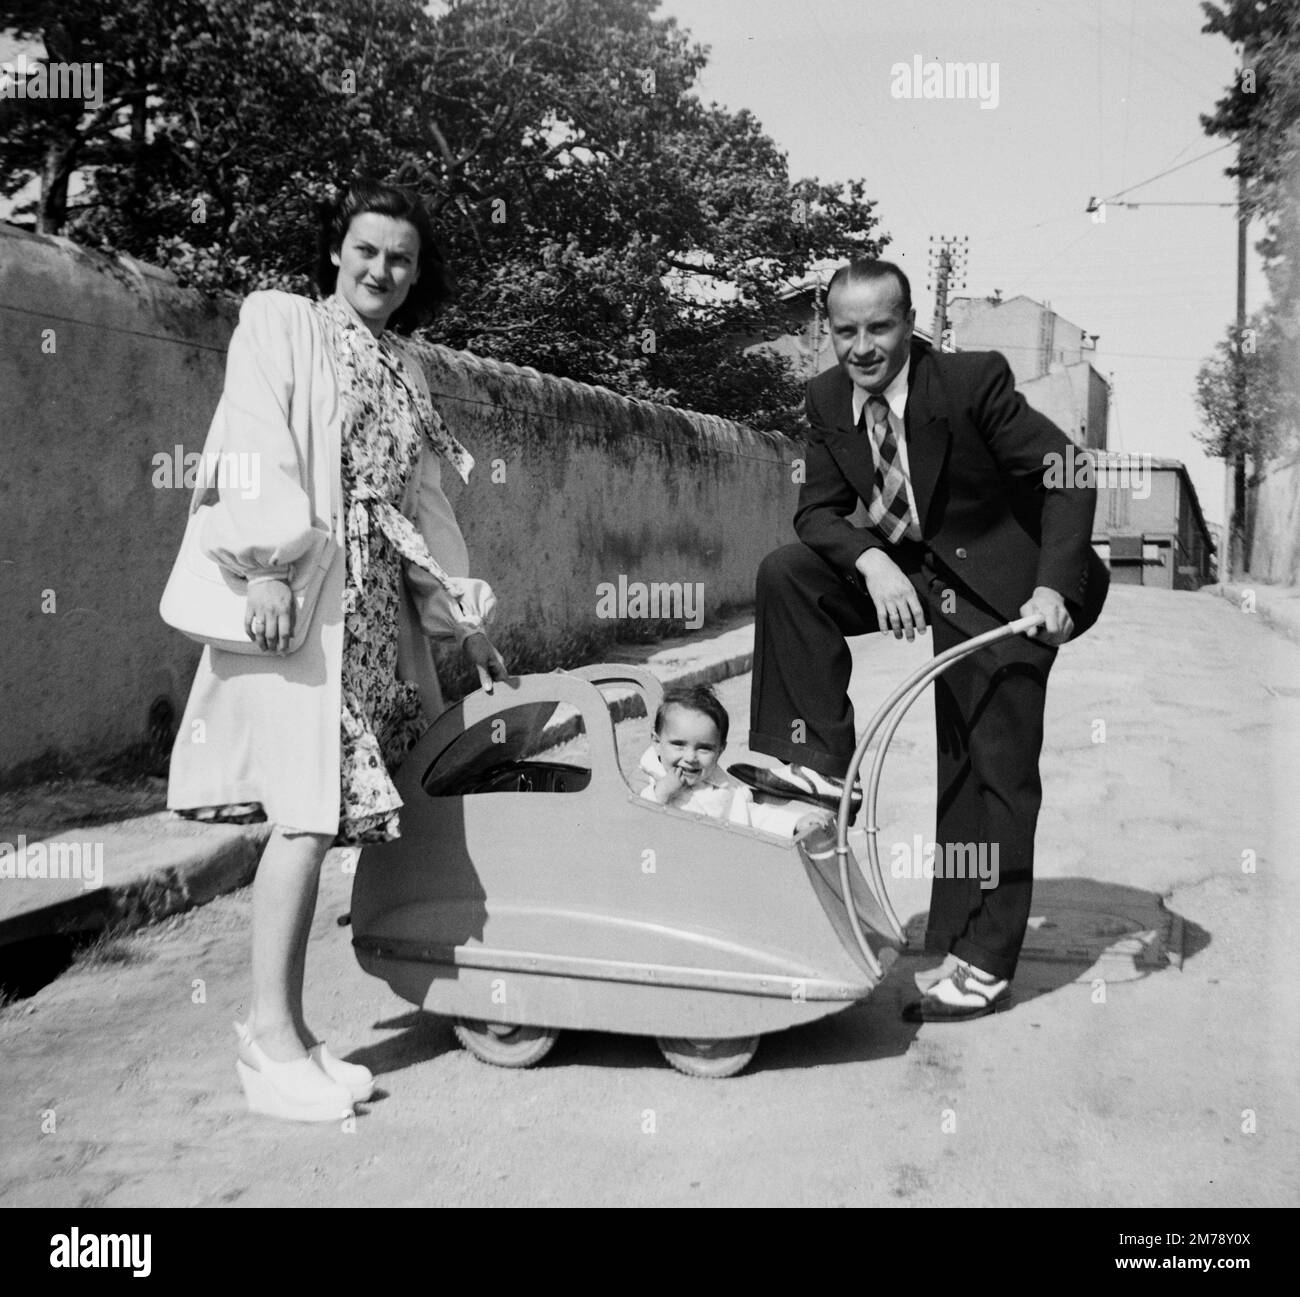 1940s Young French Couple and Child, Infant, Baby or Toddler in Vintage 1940s Baby Stroller, Pram or Perambulor in Streets of Old Marseille France 1945. Vintage Black and White or Monochrome Photograph. Stock Photo